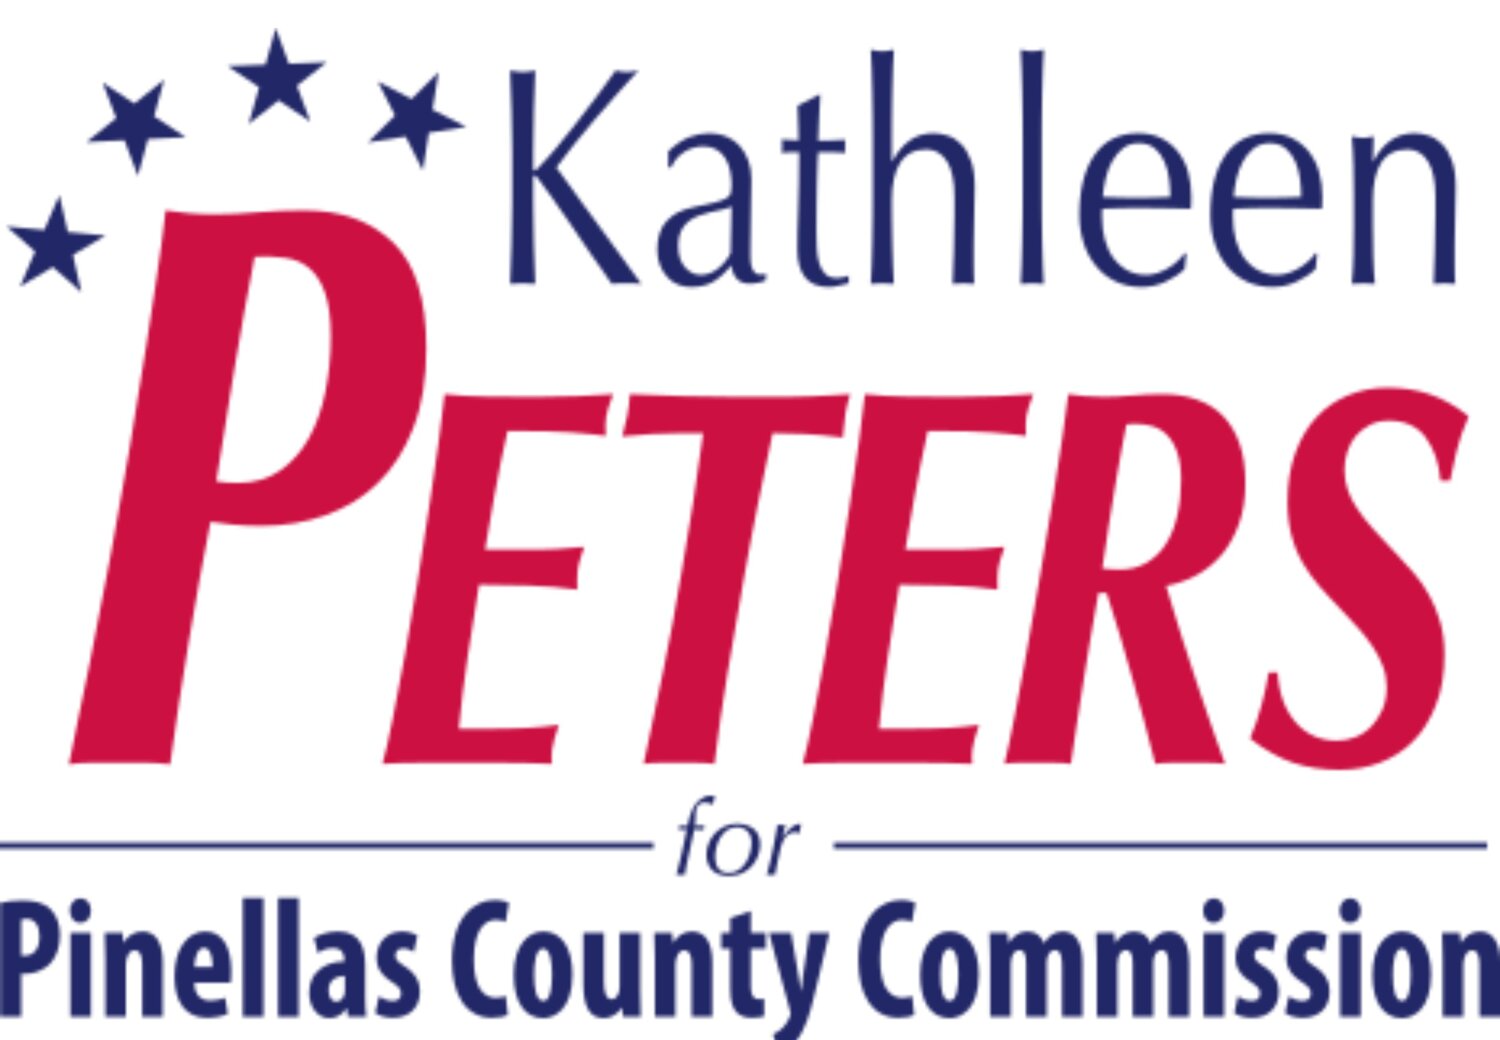 Kathleen Peters for Pinellas County Commission